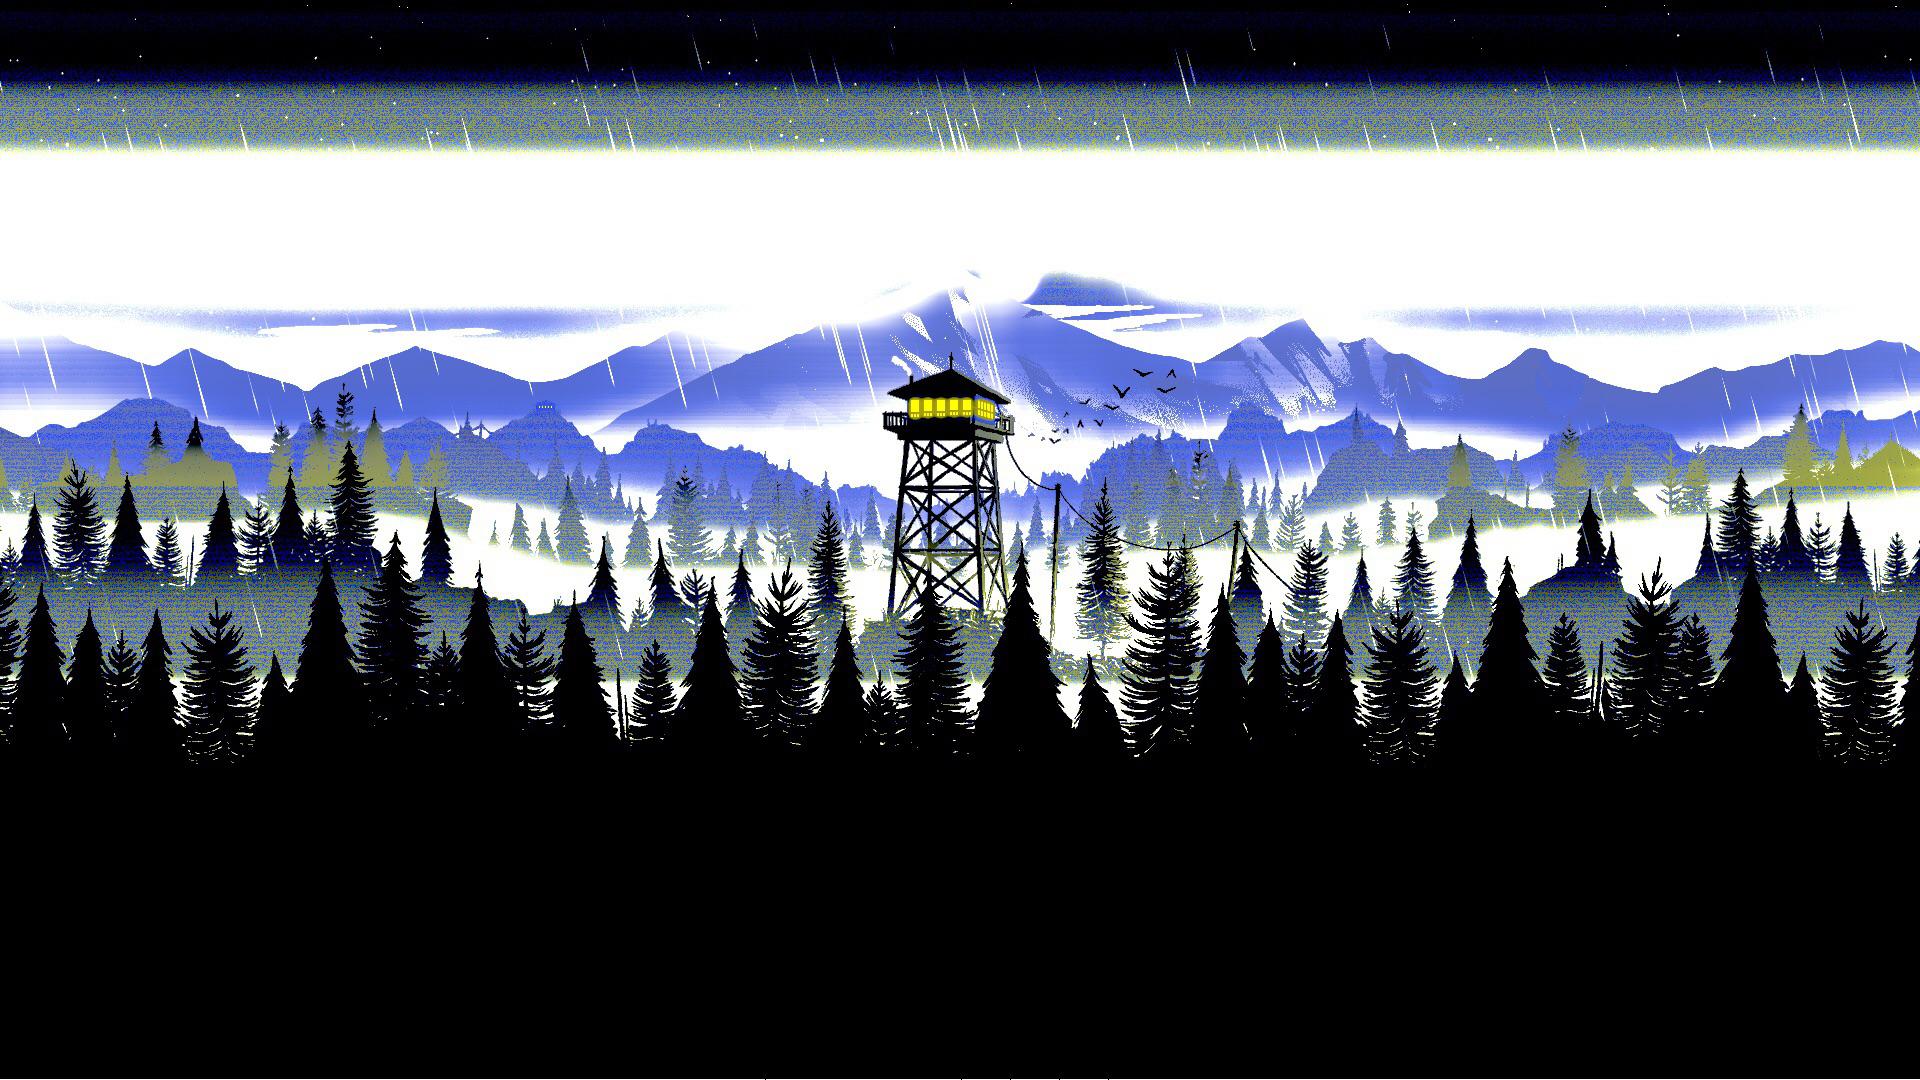 Did some editing to this background that i love. Snow capped mountains for anyone who wants this as a background